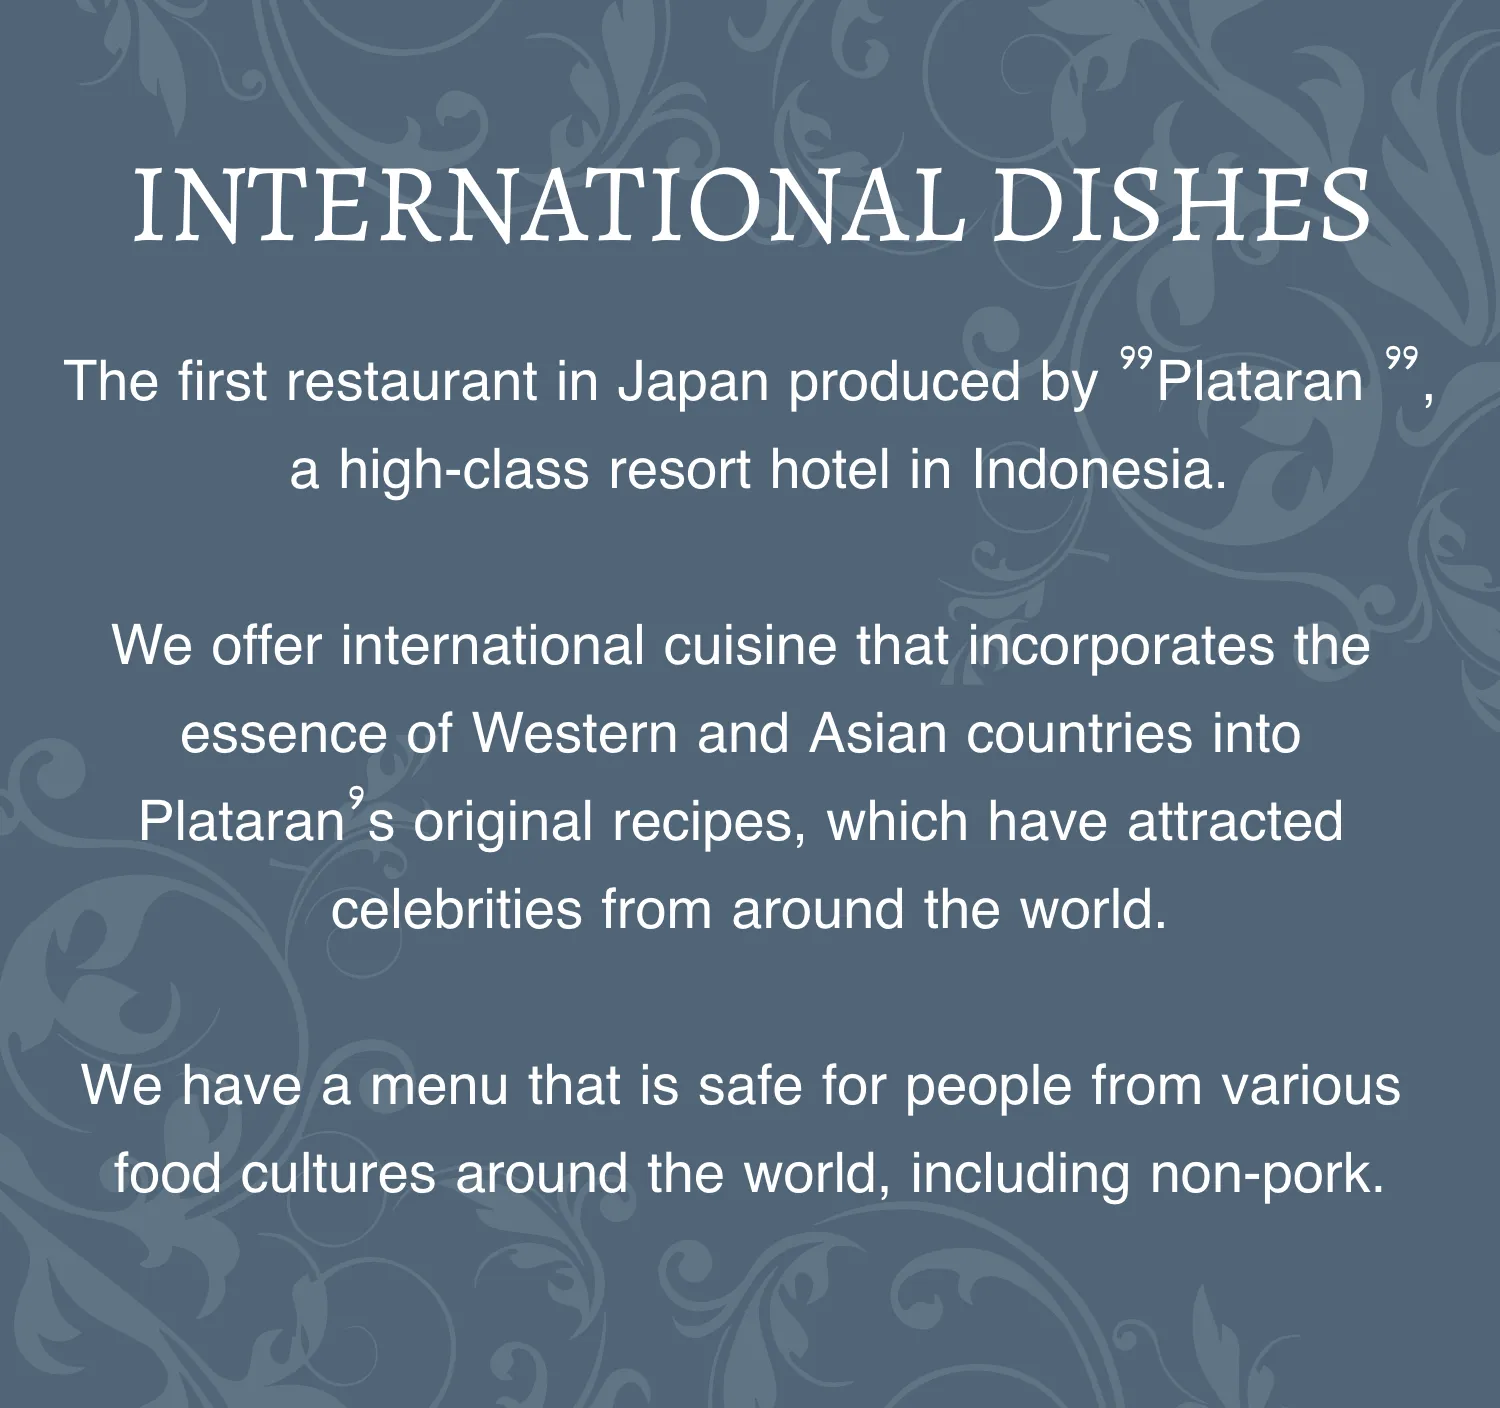 INTERNATIONAL DISHES The first restaurant in Japan produced by ”Plataran ”, a high-class resort hotel in Indonesia. We offer international cuisine that incorporates the essence of Western and Asian countries into Plataran’s original recipes, which have attracted celebrities from around the world. We have a menu that is safe for people from various food cultures around the world, including non-pork.